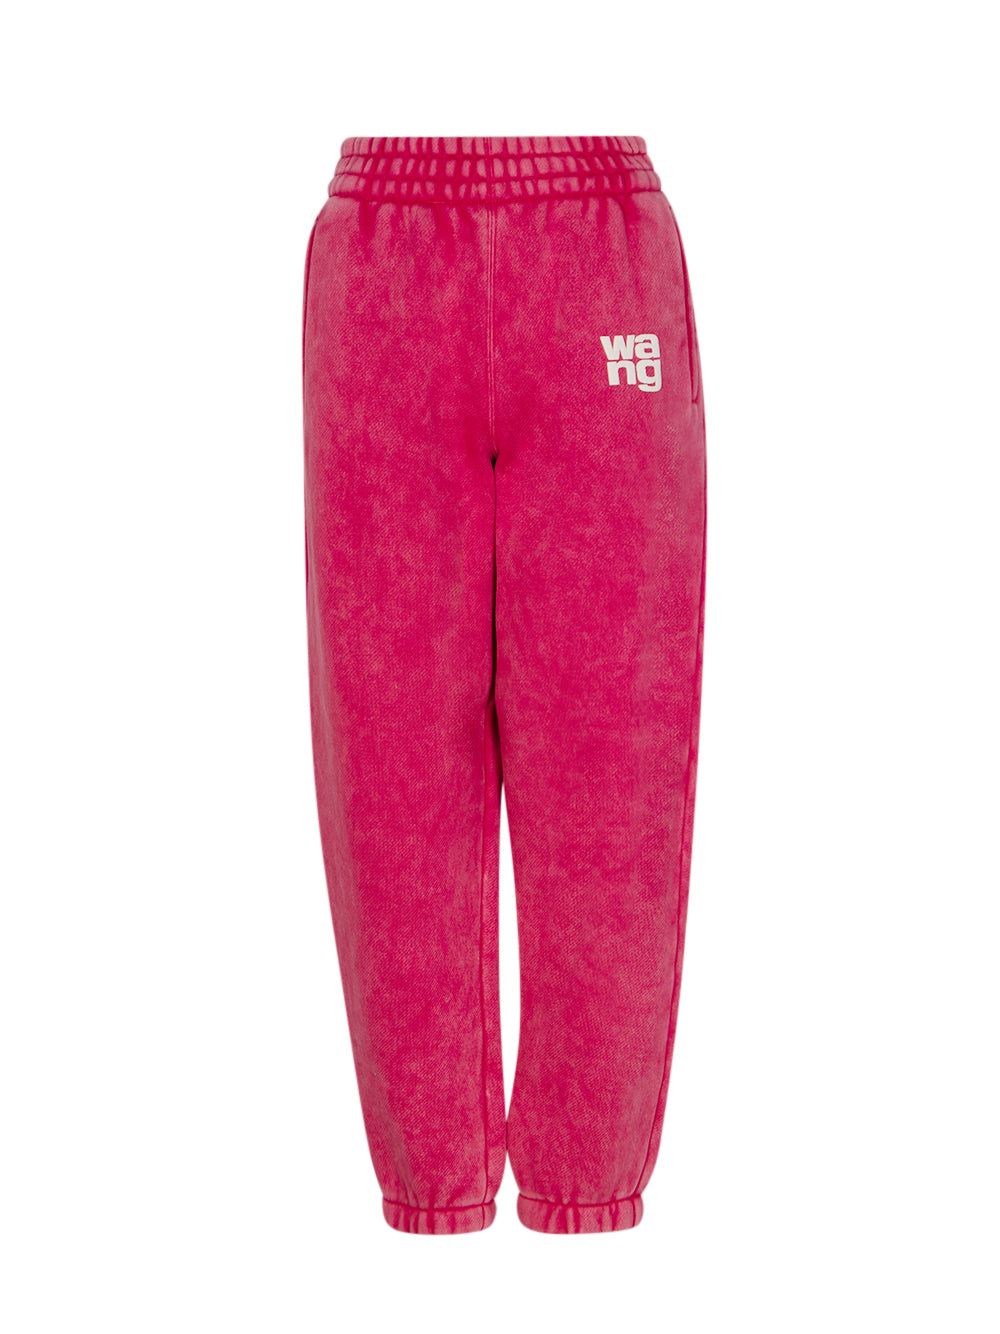 Alexander-Wang-Essential-Terry-Classic-Sweatpants-with-Puff-Paint-Logo-Soft-Cherr-01